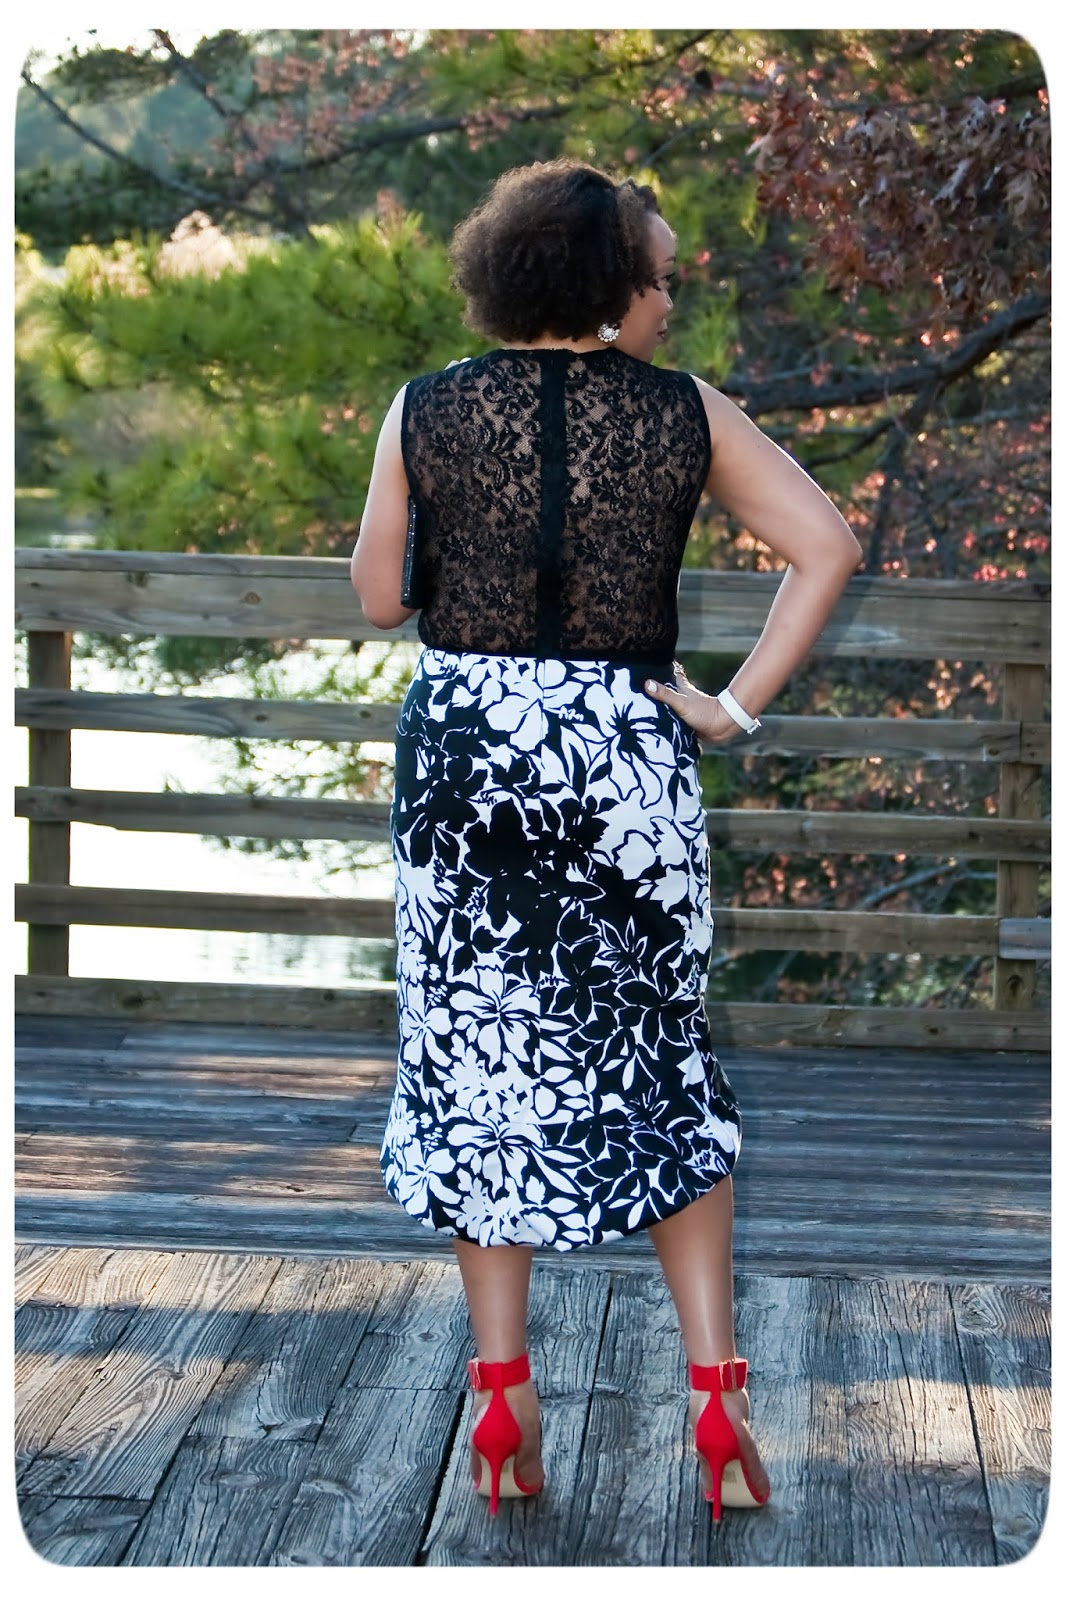 Floral & Lace Panel Dress Inpired by Clements Ribeiro made with Mood Fabrics - Erica B.'s - DIY Style!